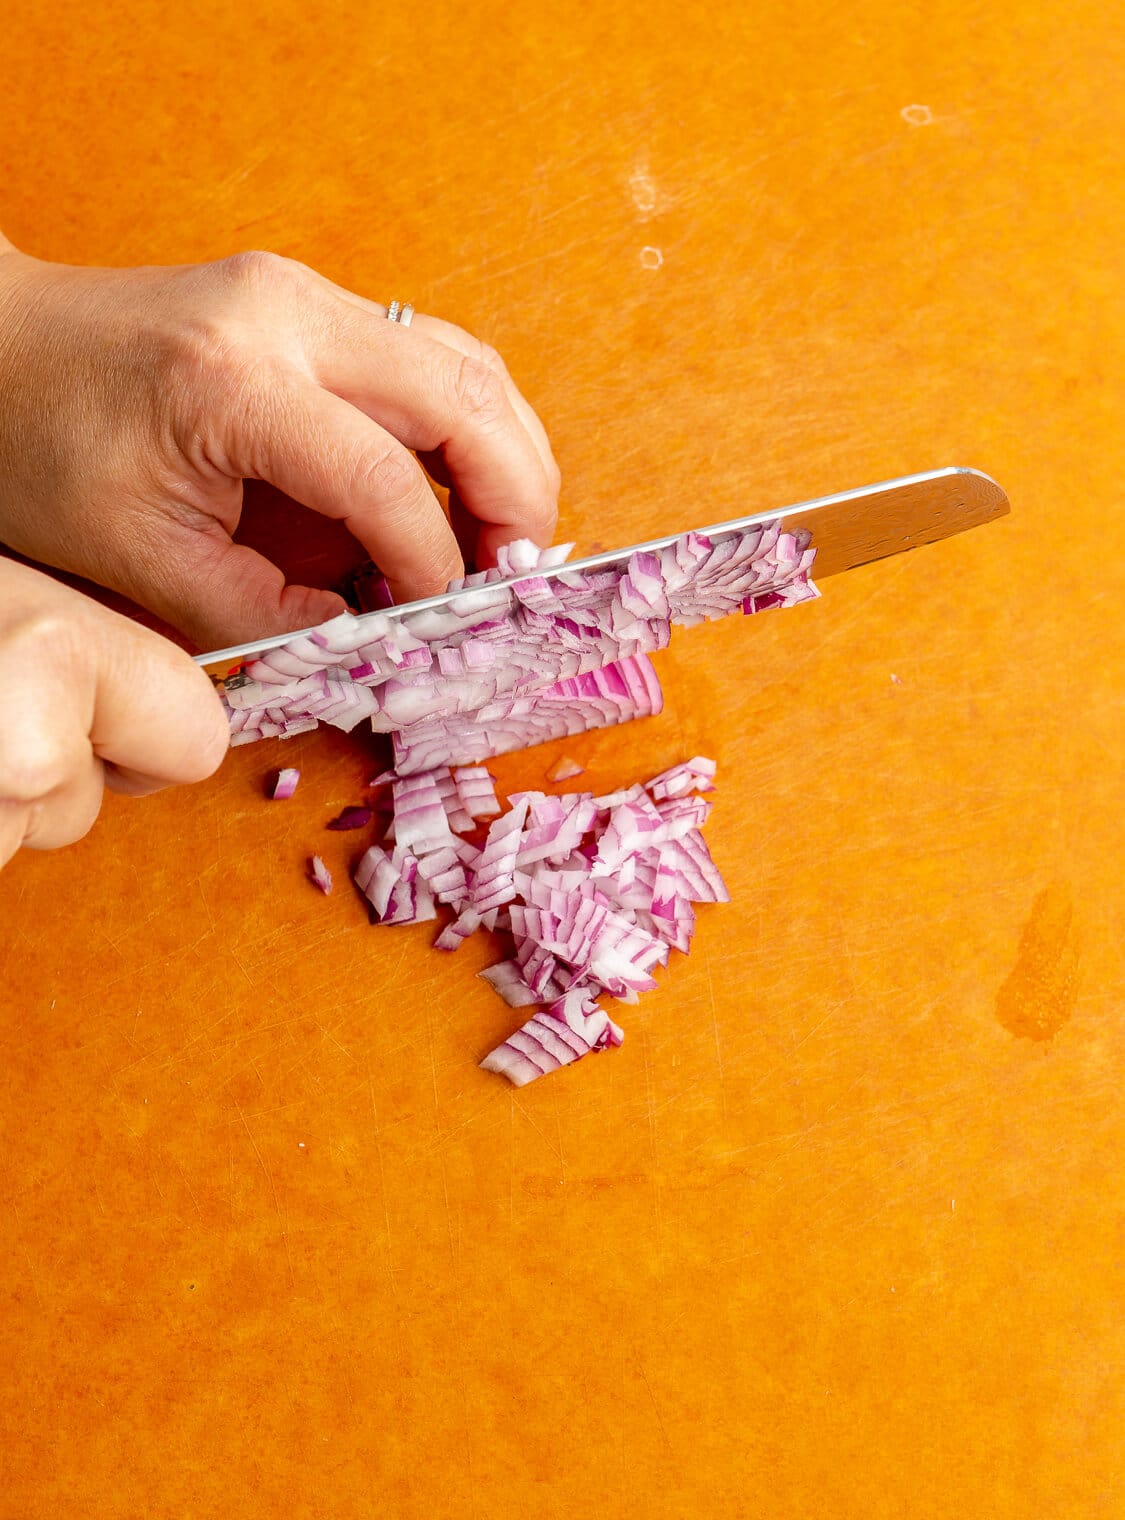 Hand holding a butcher knife dicing onions on a cutting board.